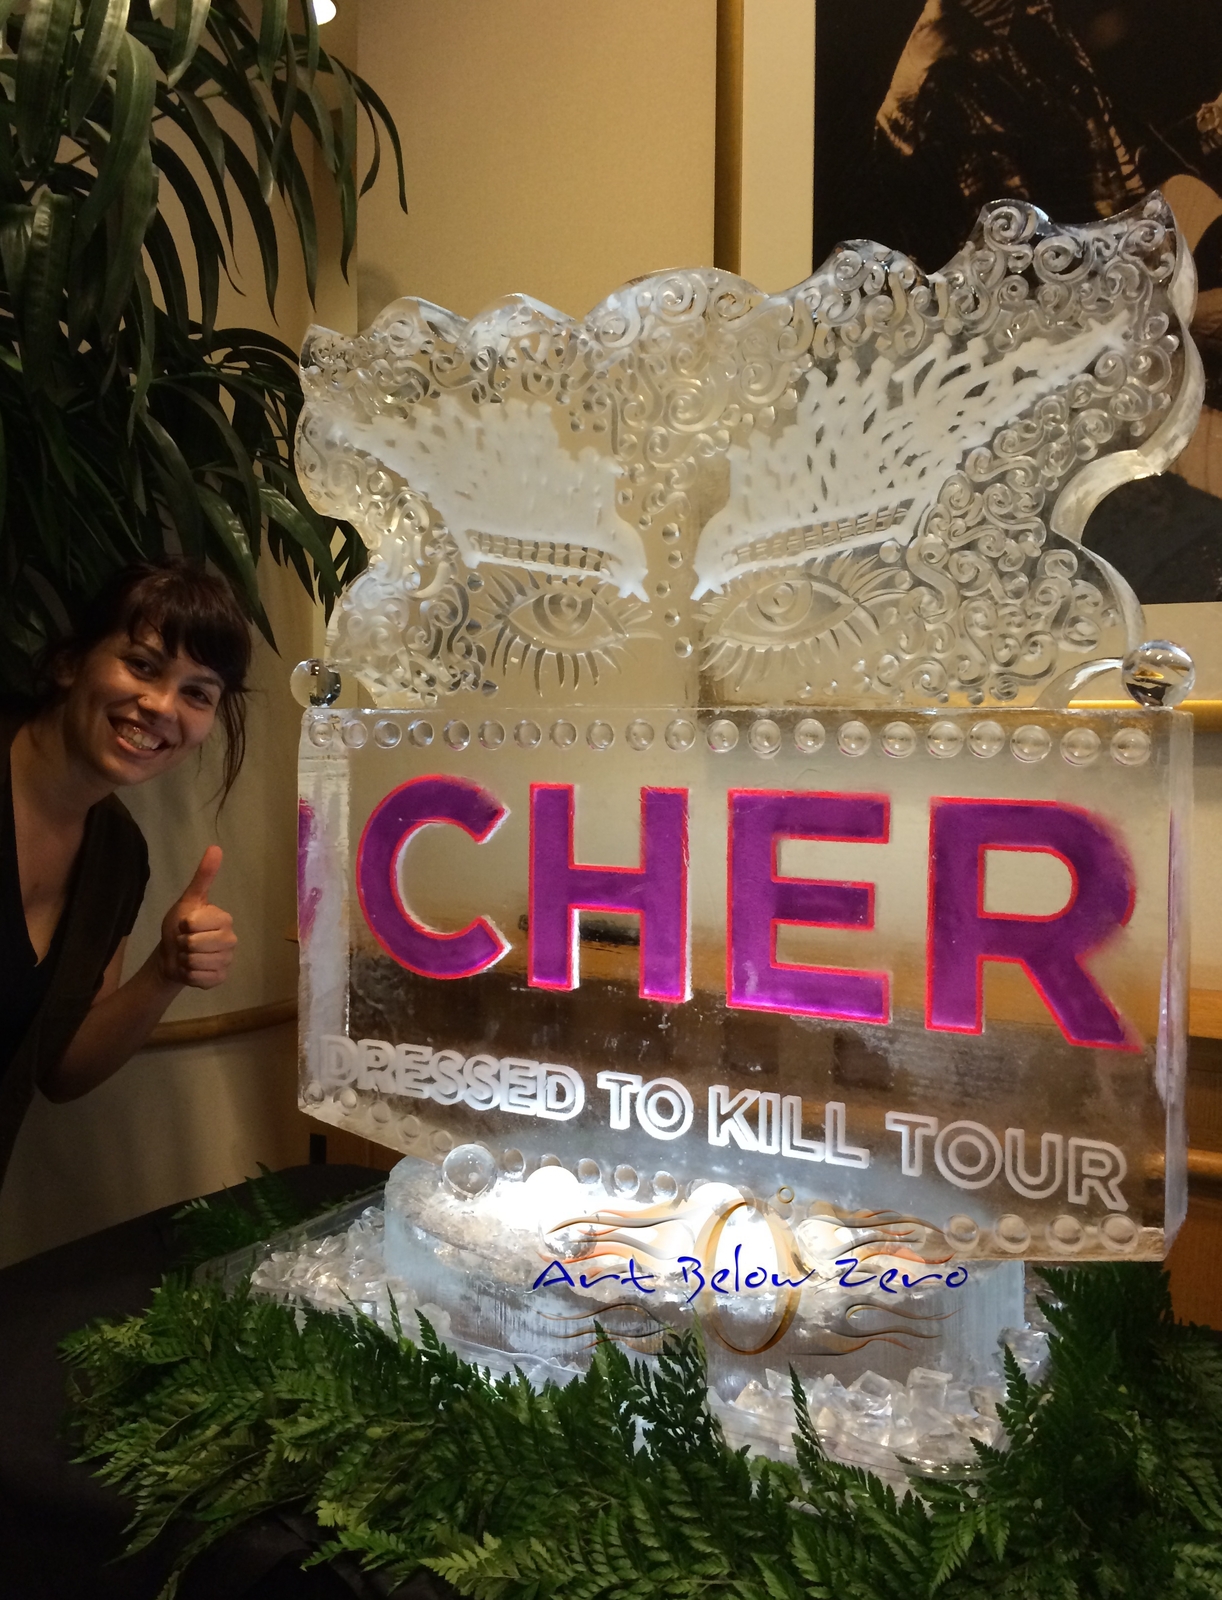 Cher_dress_to_kill_tour_ice_sculpture